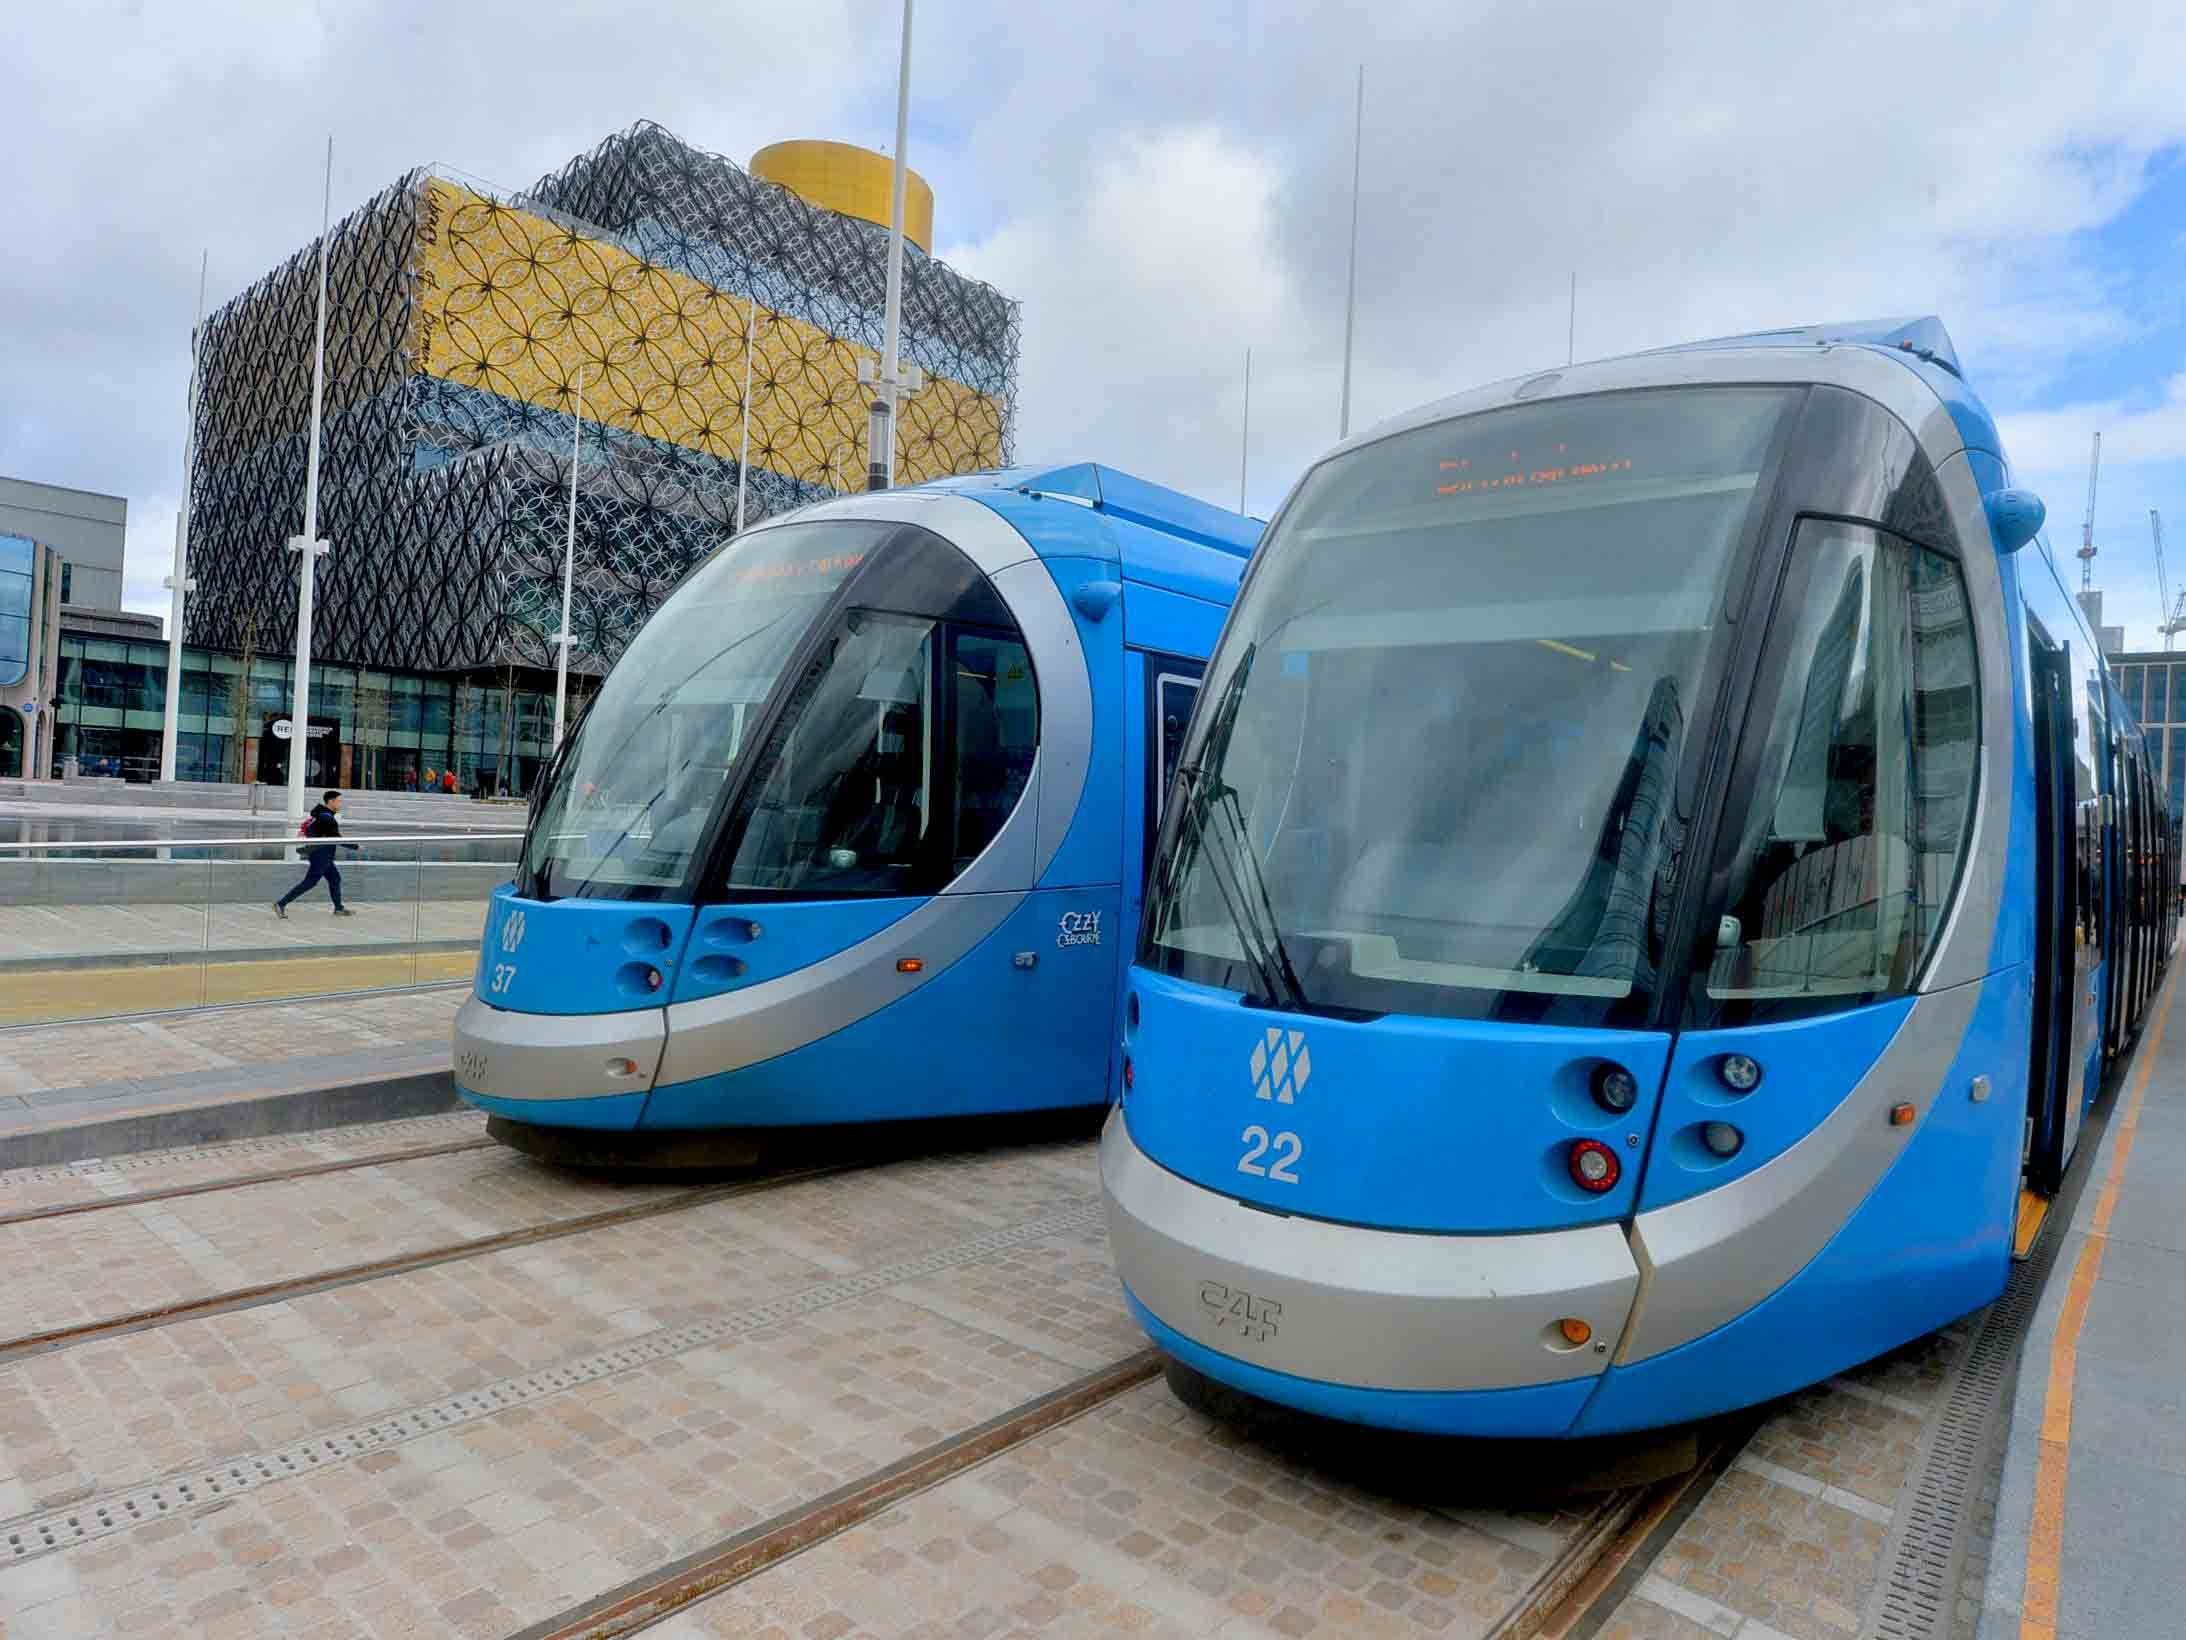 West Midlands Metro announce delays due to 'missing' tram 